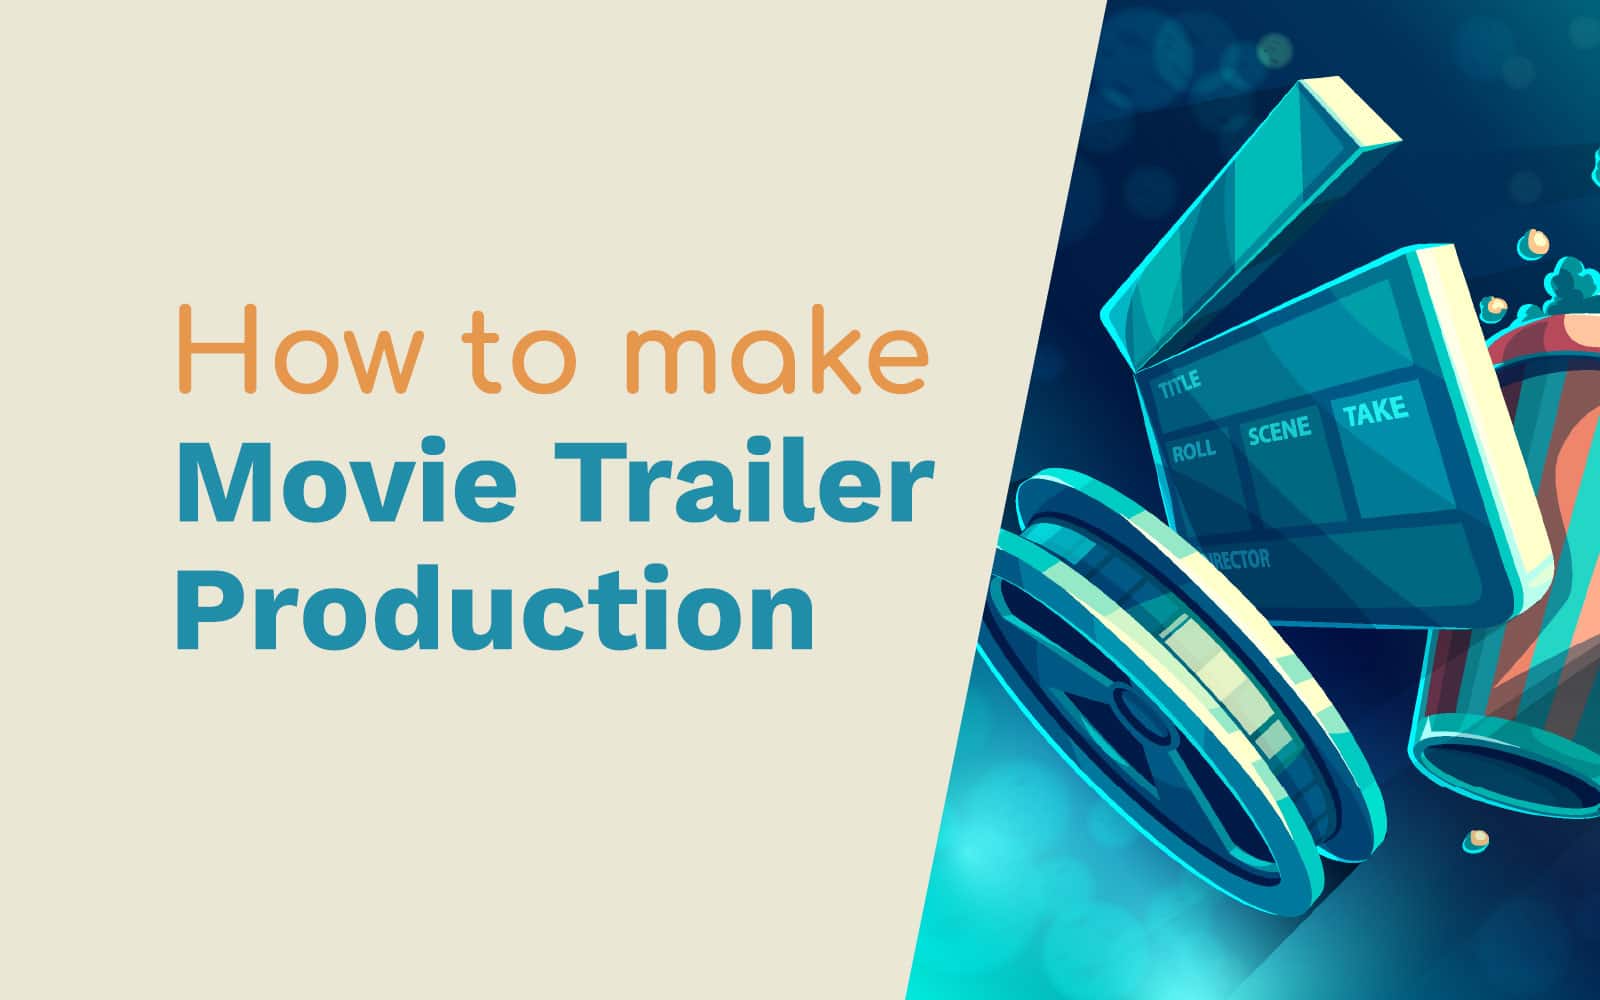 How to Make Movie Trailer Production General movie trailer voice Music Radio Creative